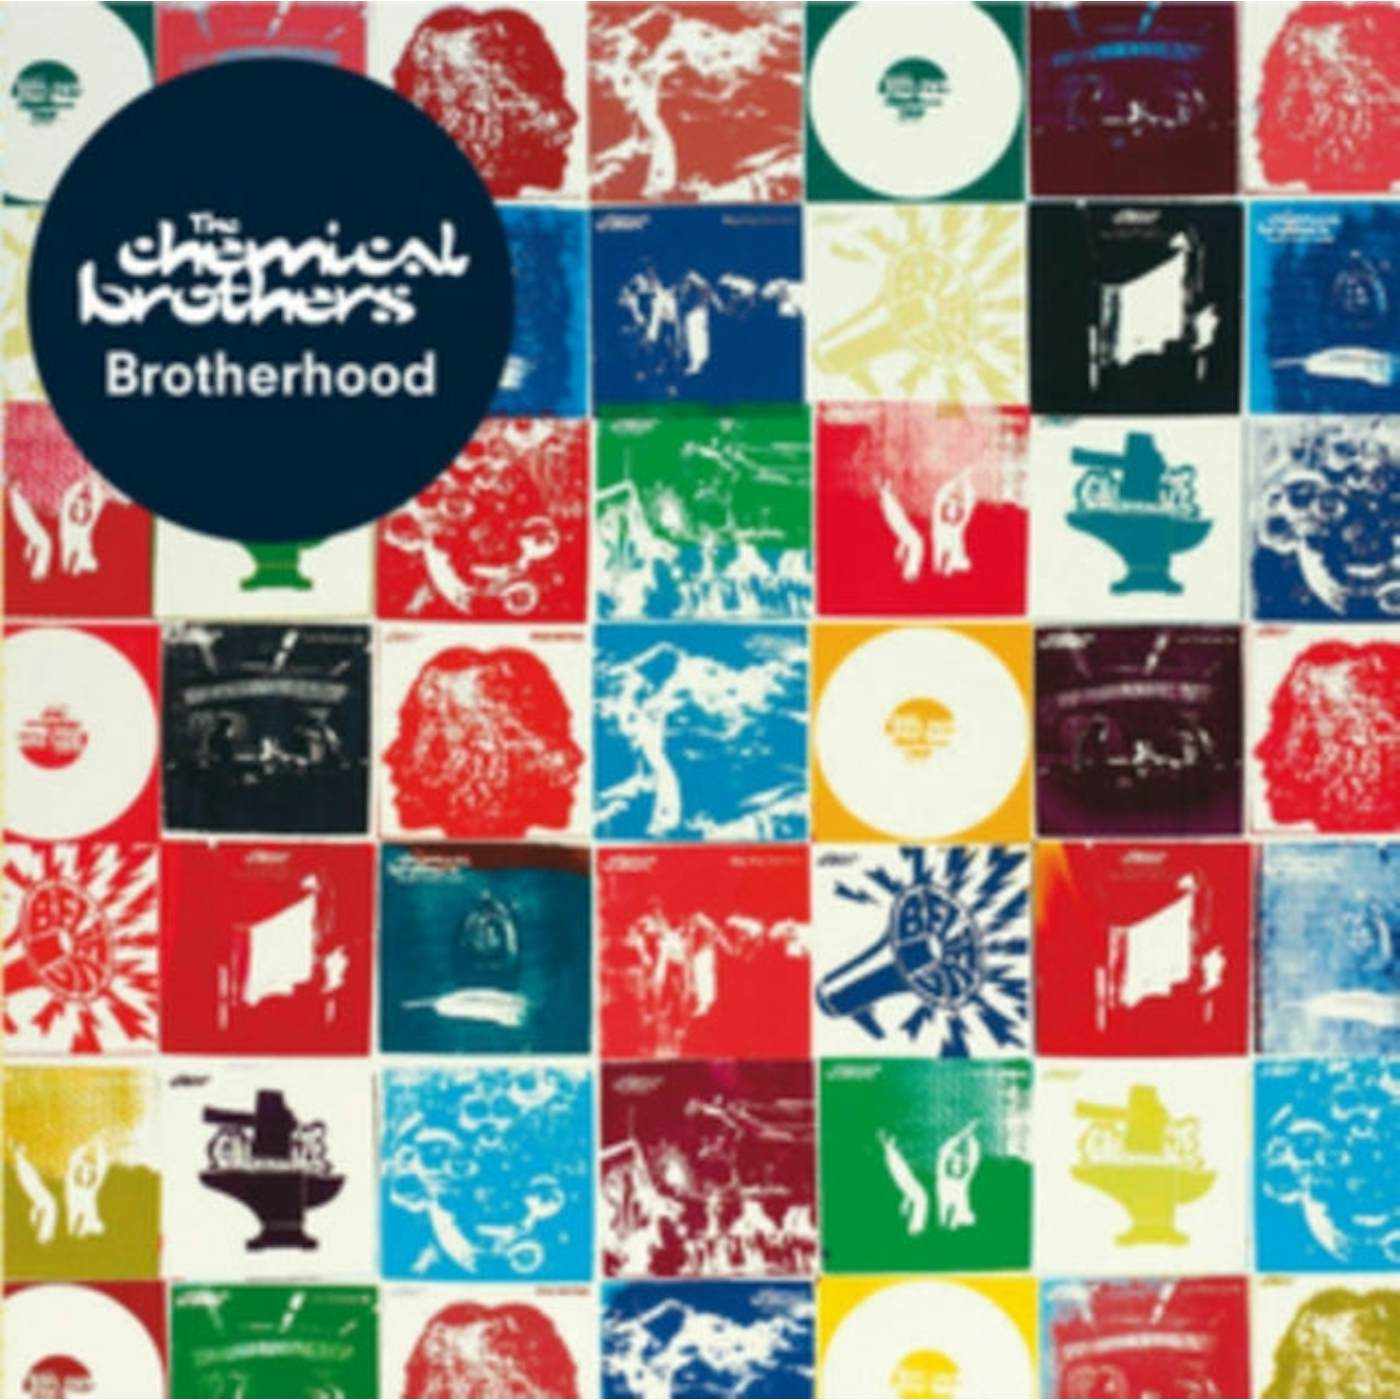 The Chemical Brothers LP Vinyl Record - Brotherhood | The Definitive Singles